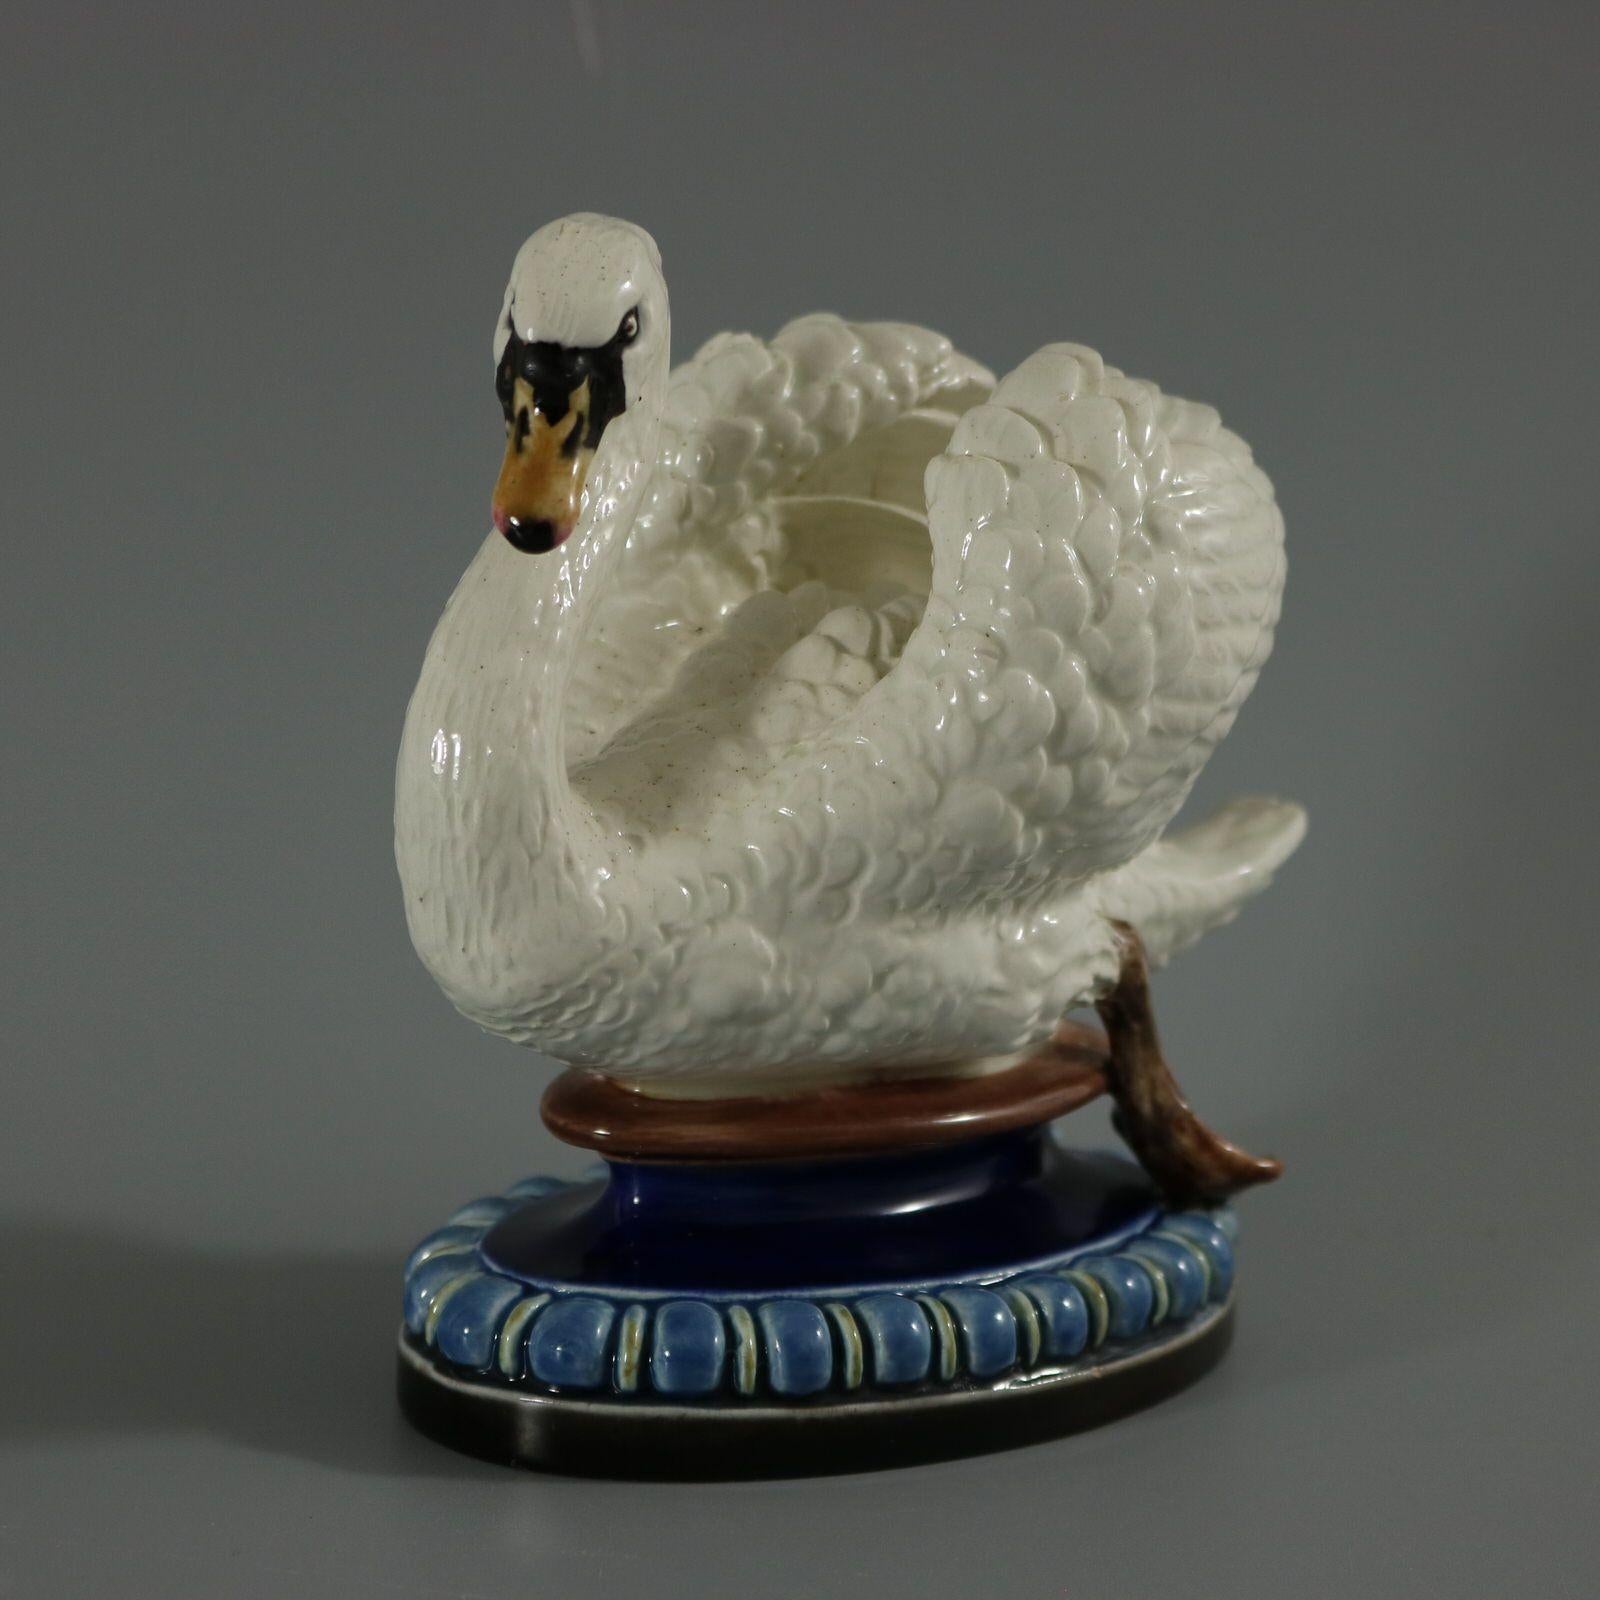 Lonitz Majolica figure which features a swan in a swimming pose. Colouration: white, blue, brown, are predominant. The piece bears maker's marks for the Lonitz pottery. Bears a pattern number, '1767'.